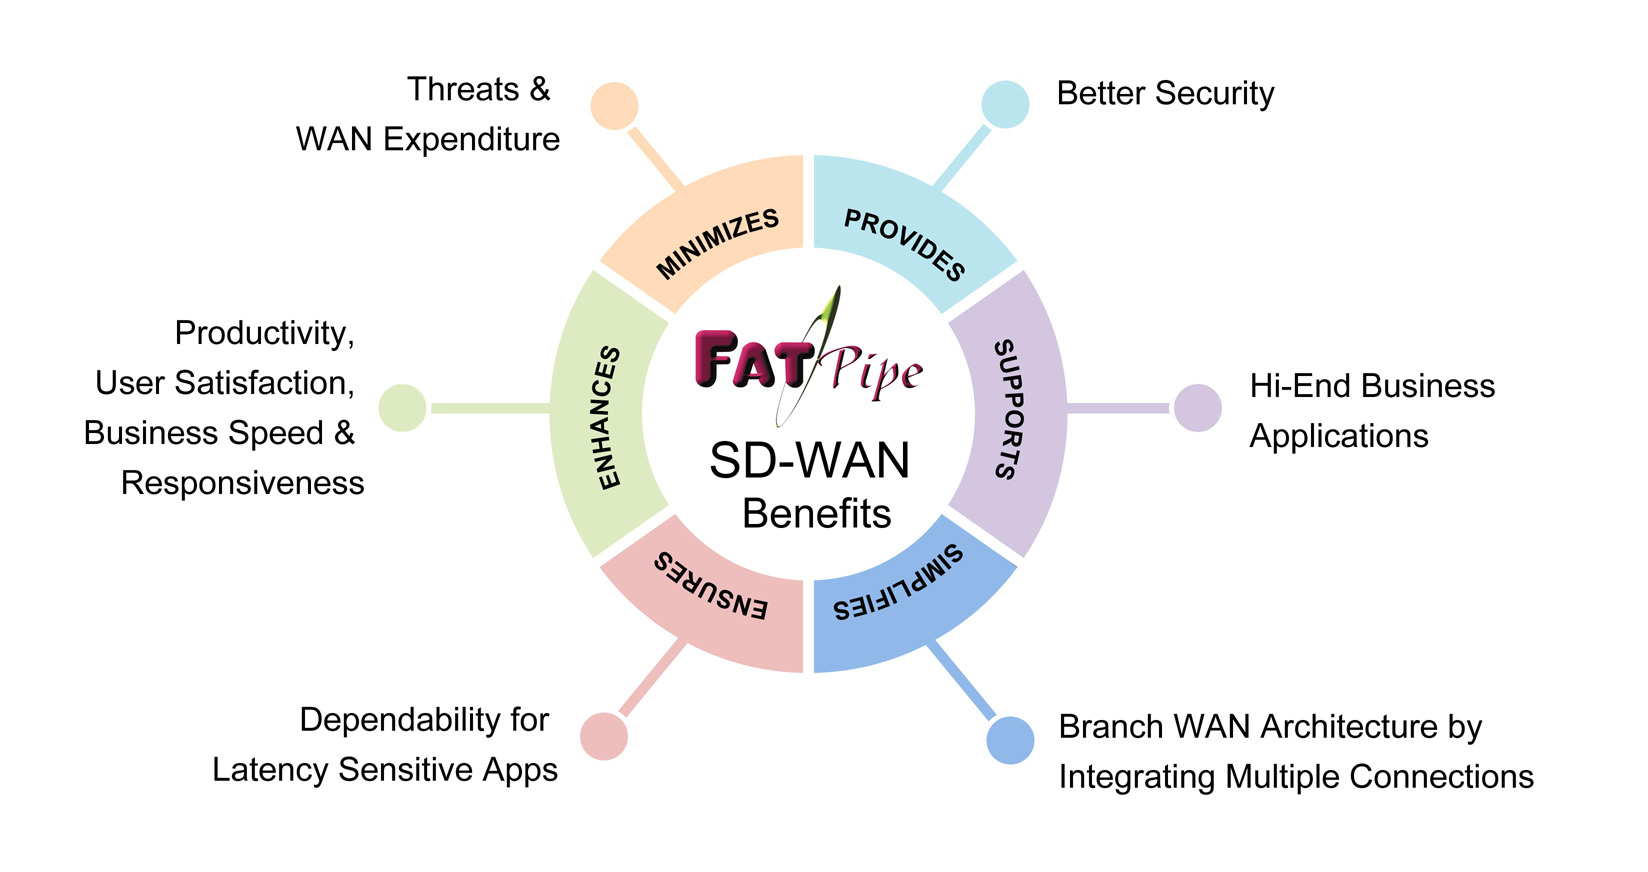 FatPipe SD-WAN Benefits